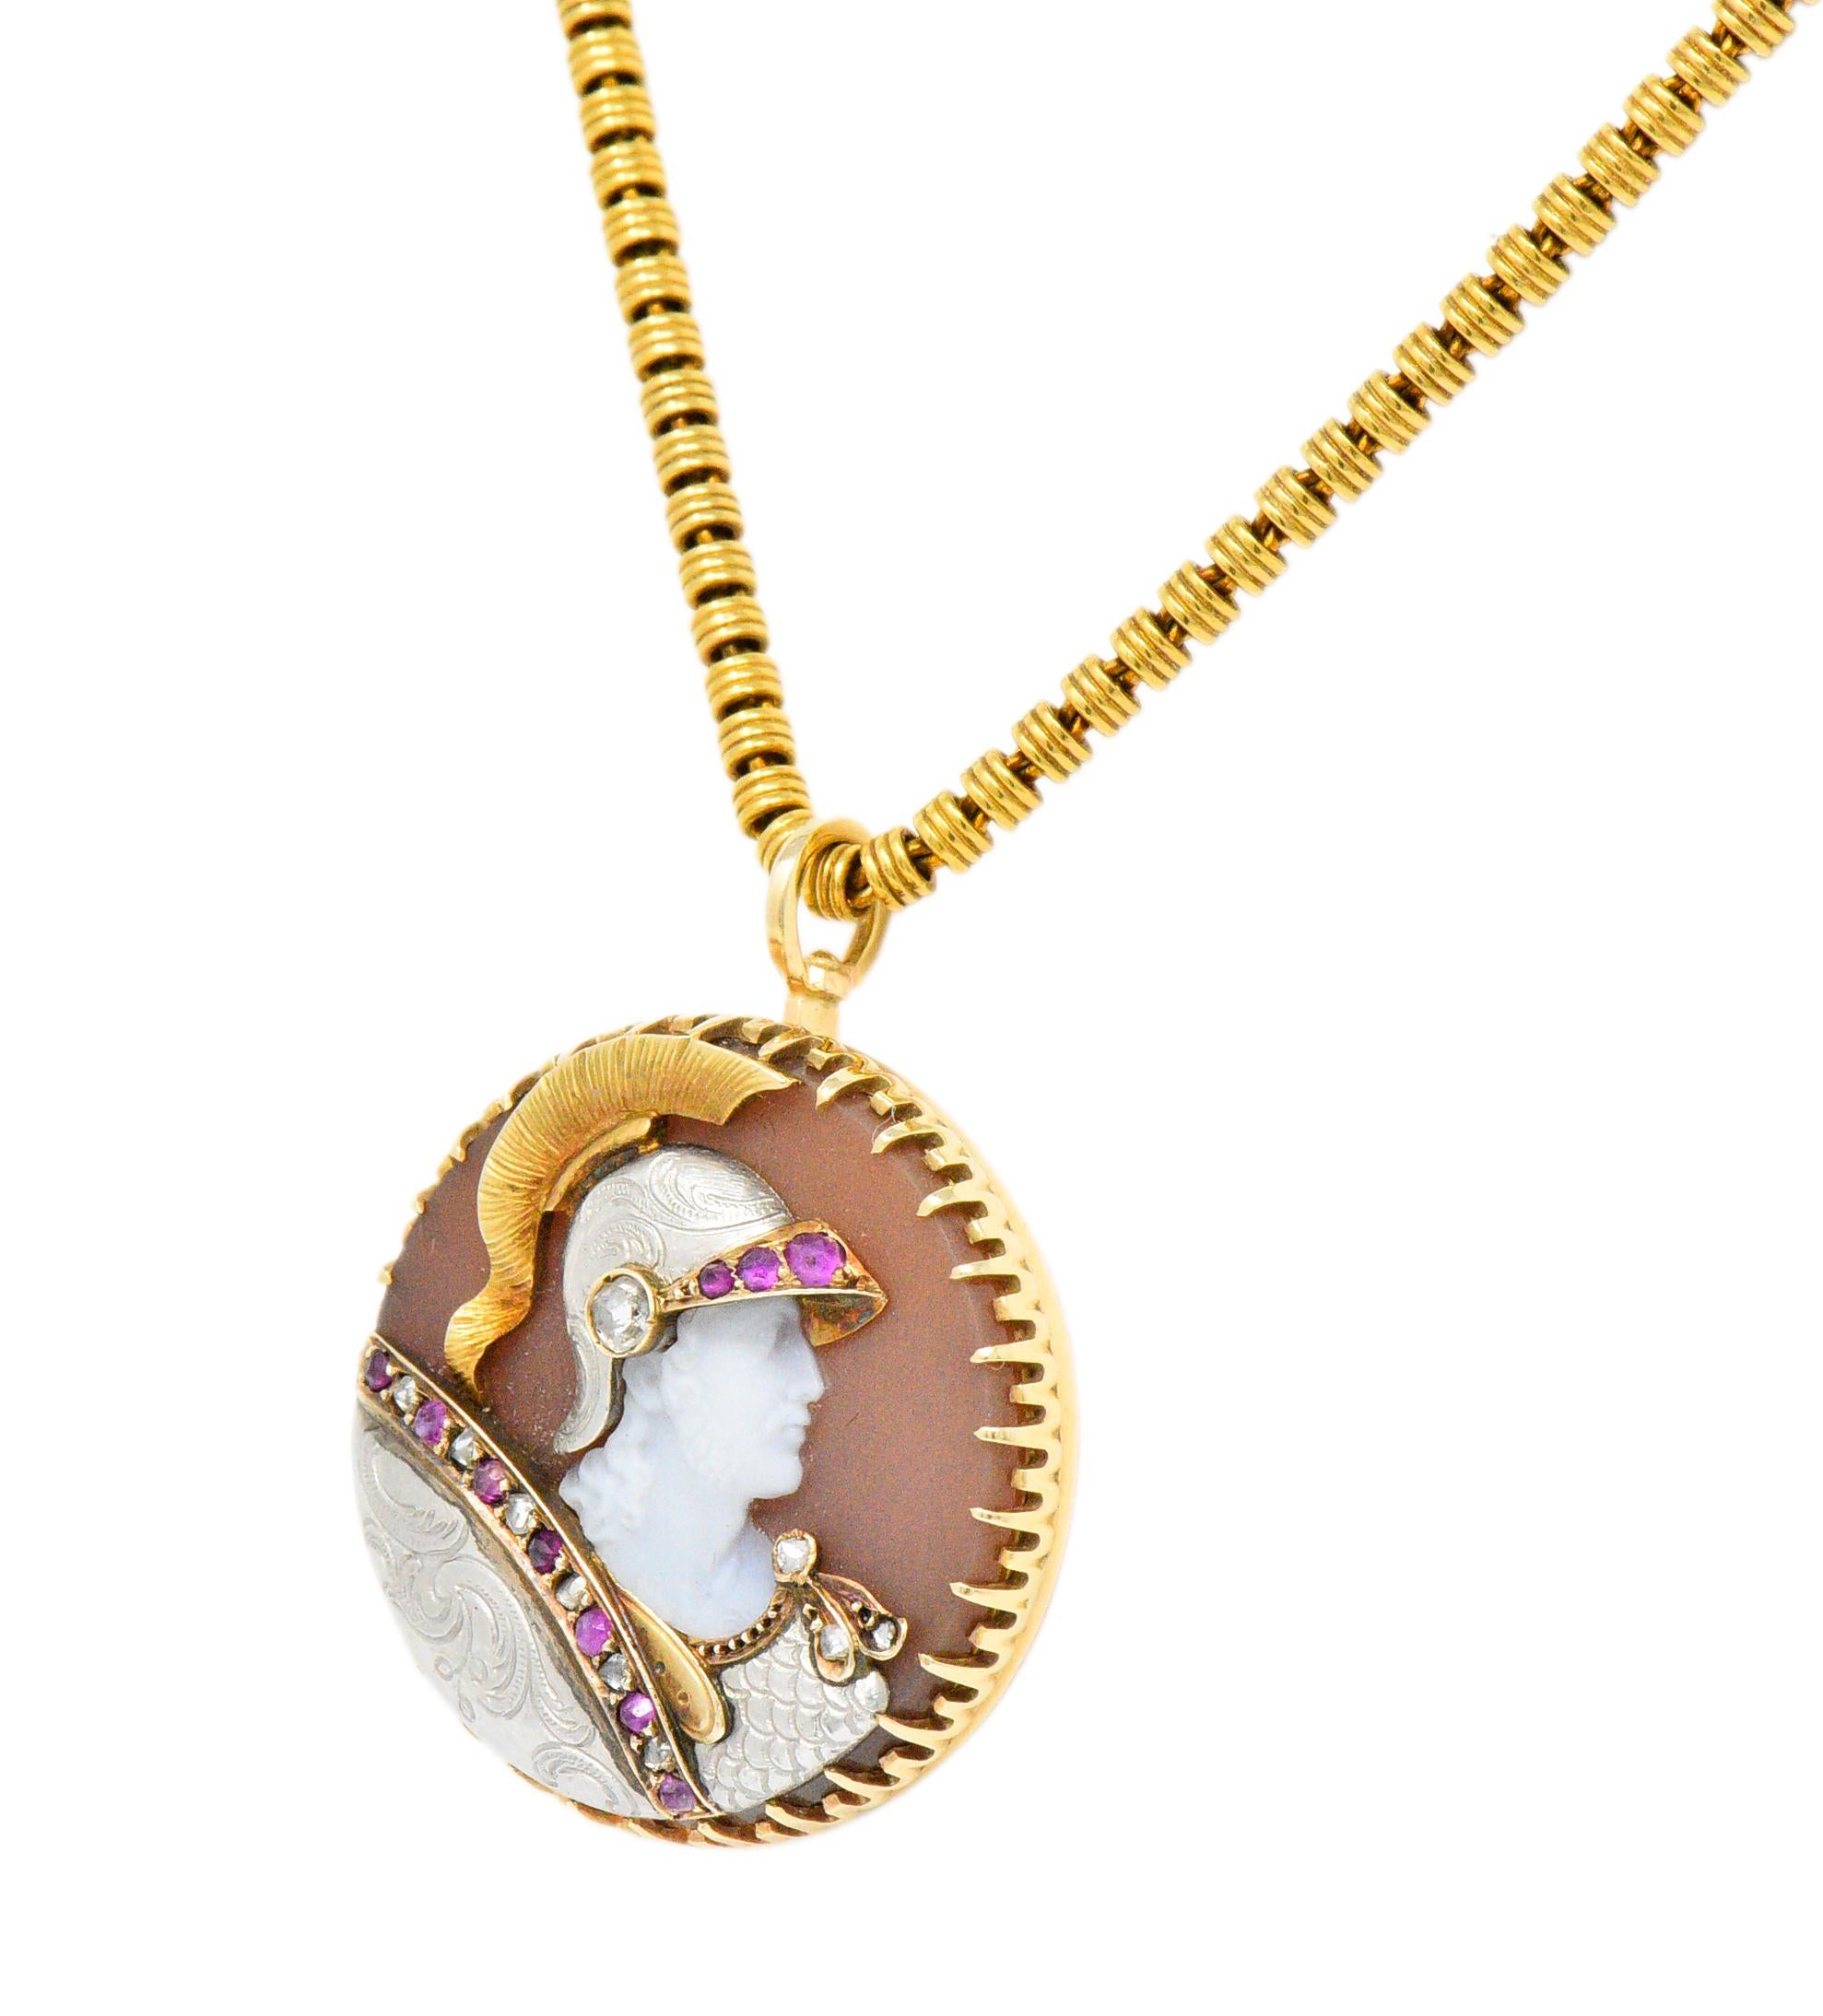 Circular pendant centers a claw set carved hardstone depicting the cameo profile of a Roman Centurion topped by a gold plumed helmet and carrying an ornate shield 

Translucent mauve background with striking white carved details

With applied gold